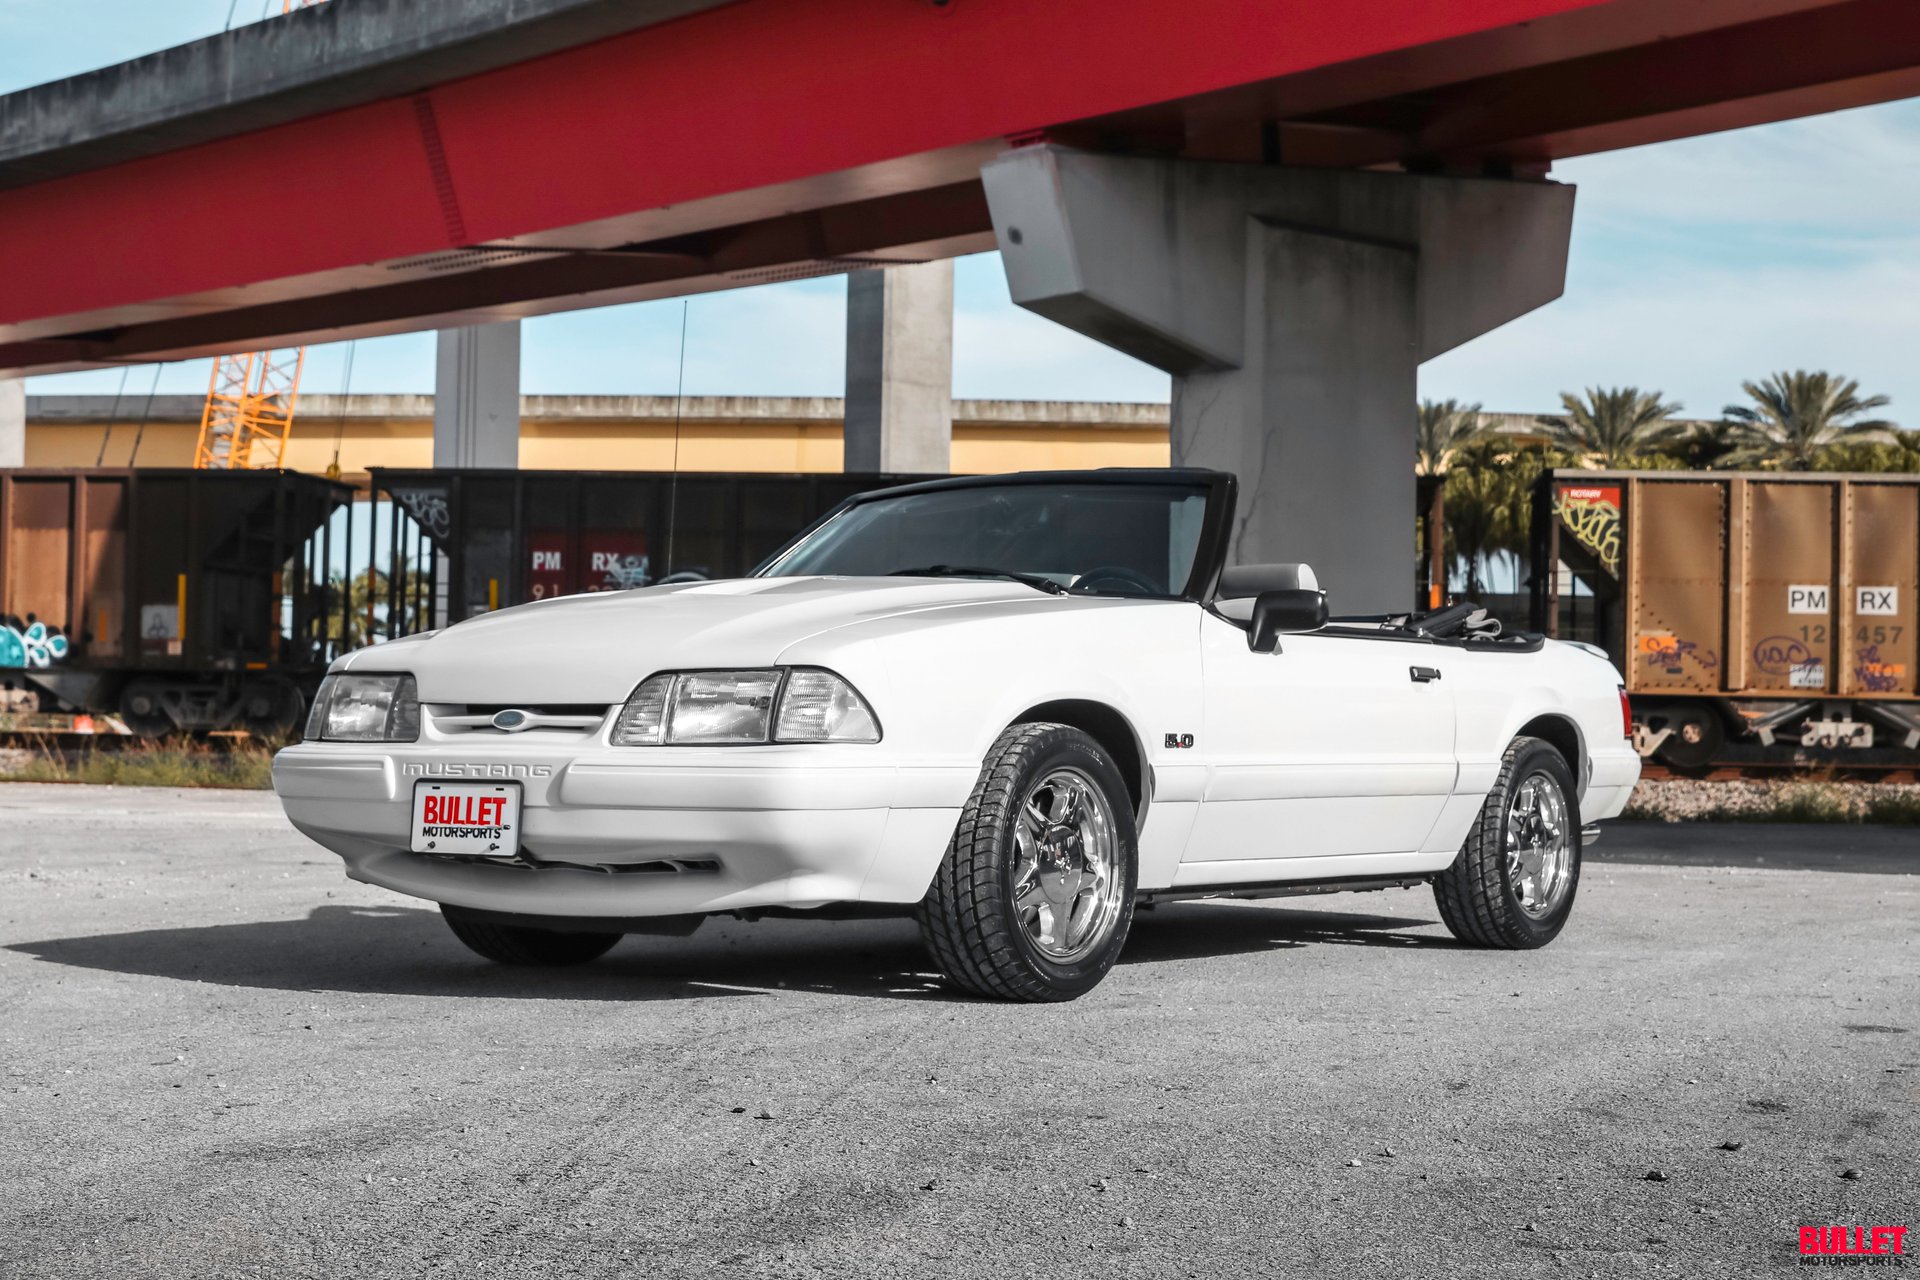 1991 ford mustang convertible